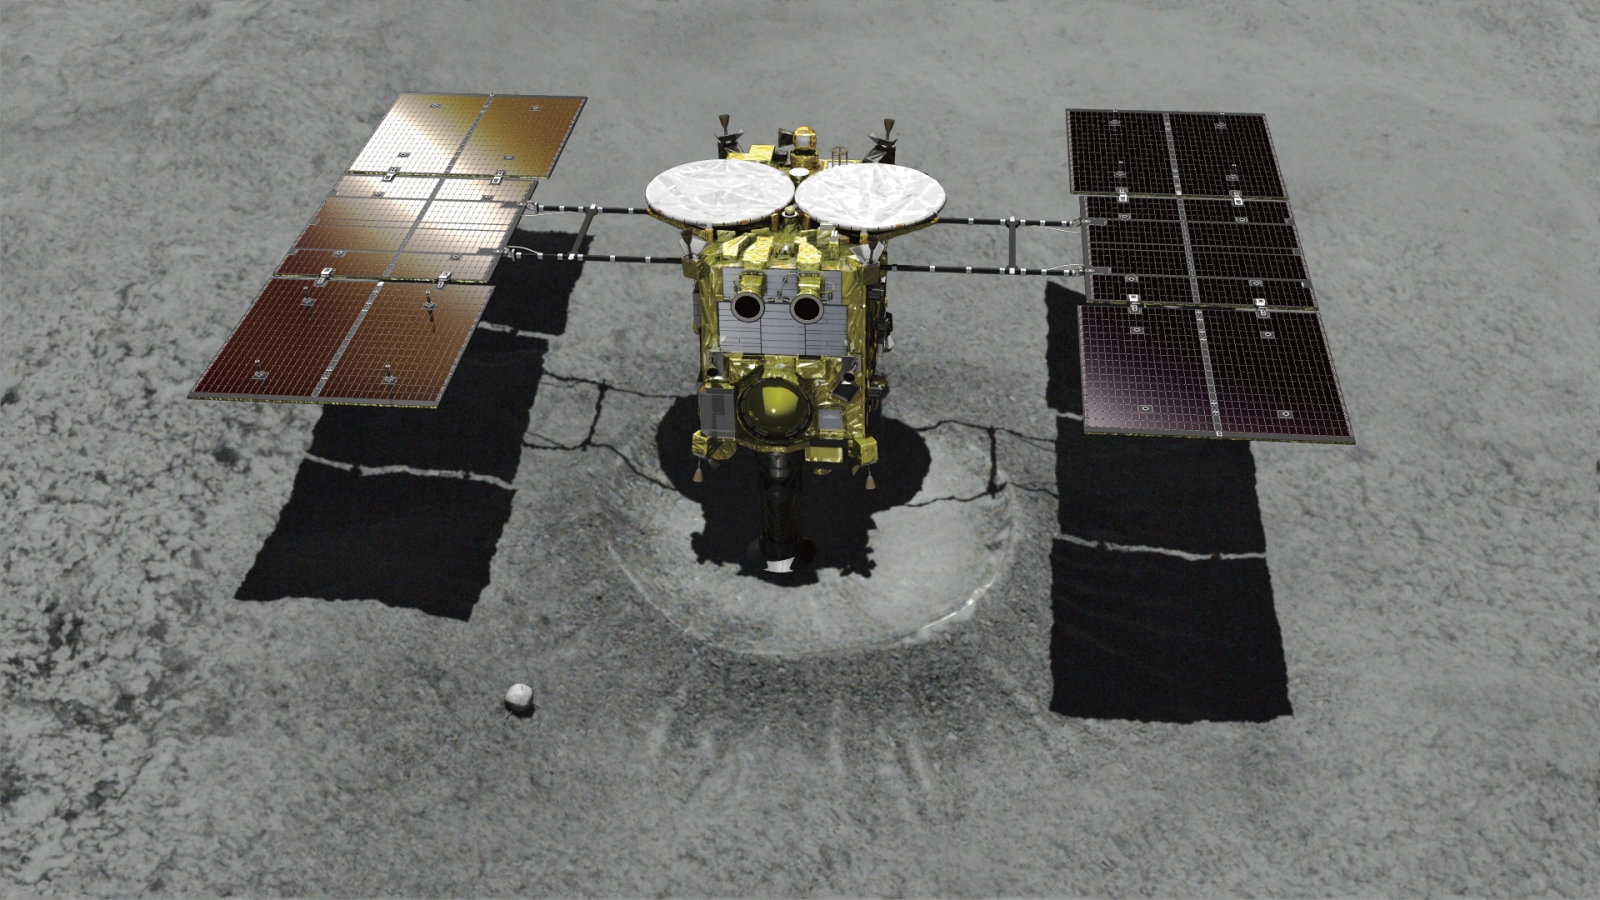 Japan's Hayabusa2 lands on asteroid Ryugu to collect samples | DeviceDaily.com